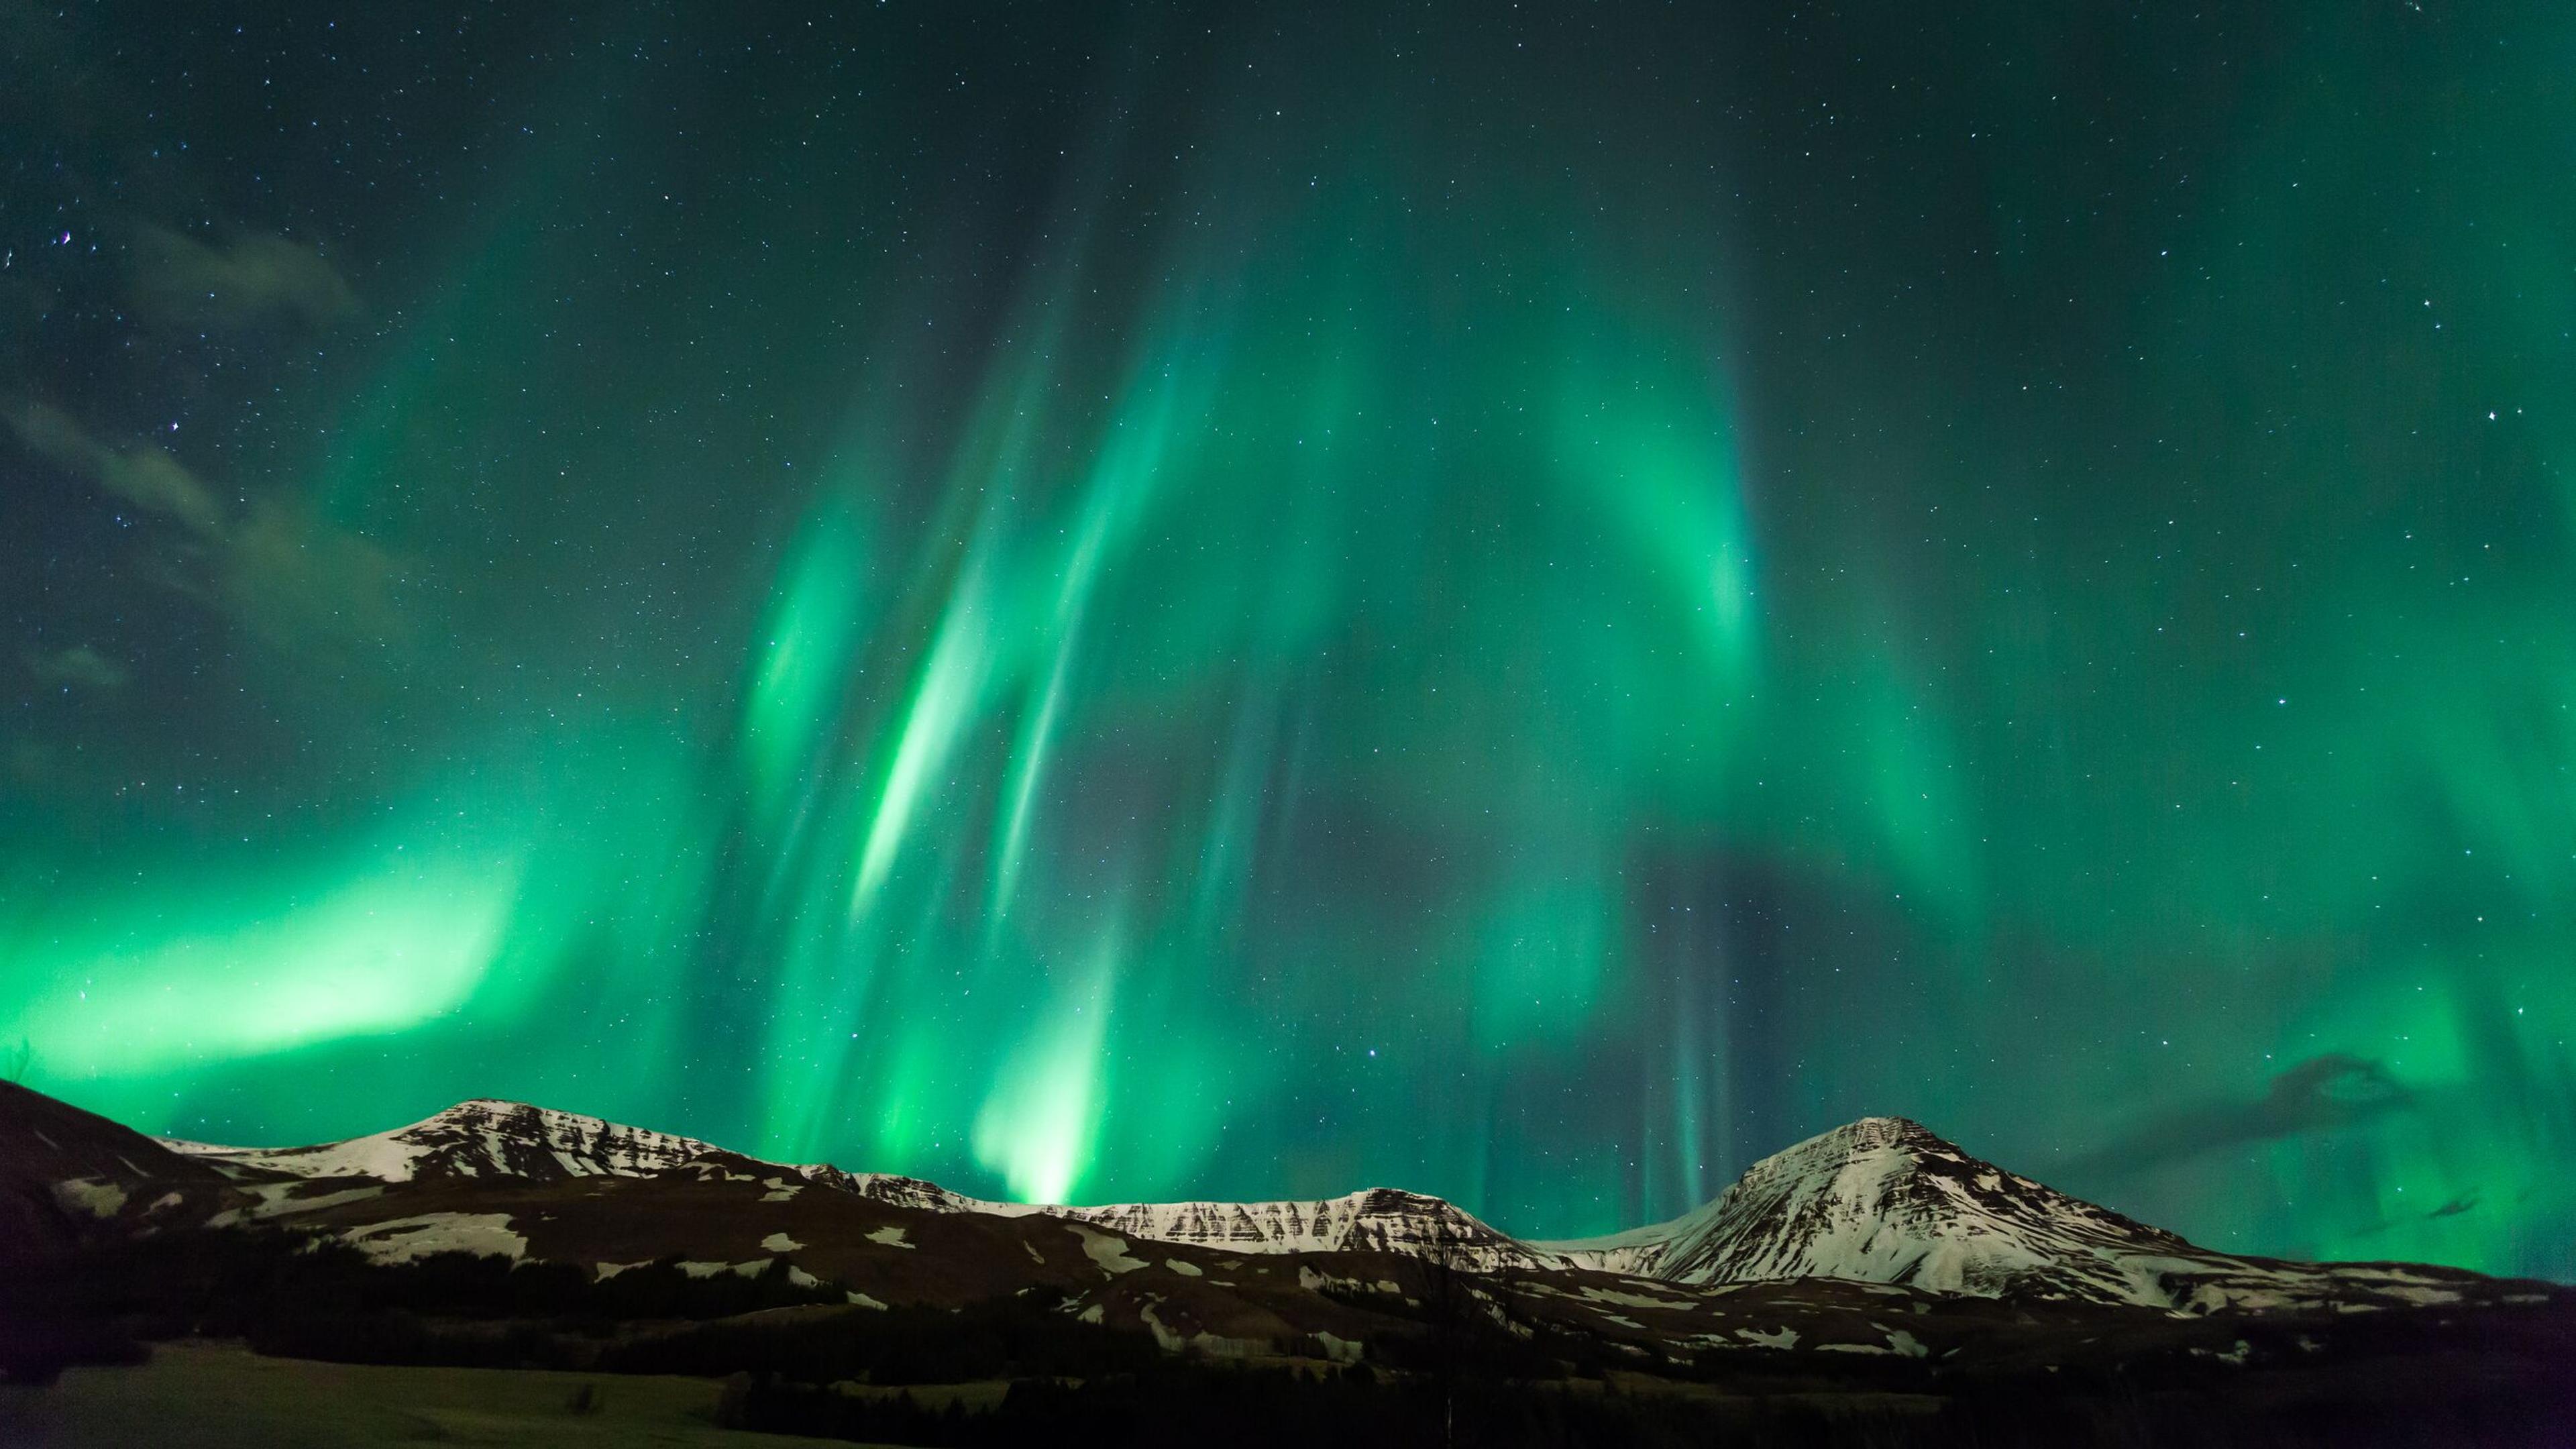 Aurora Borealis streaking over a snow-capped mountain range under a starry sky.